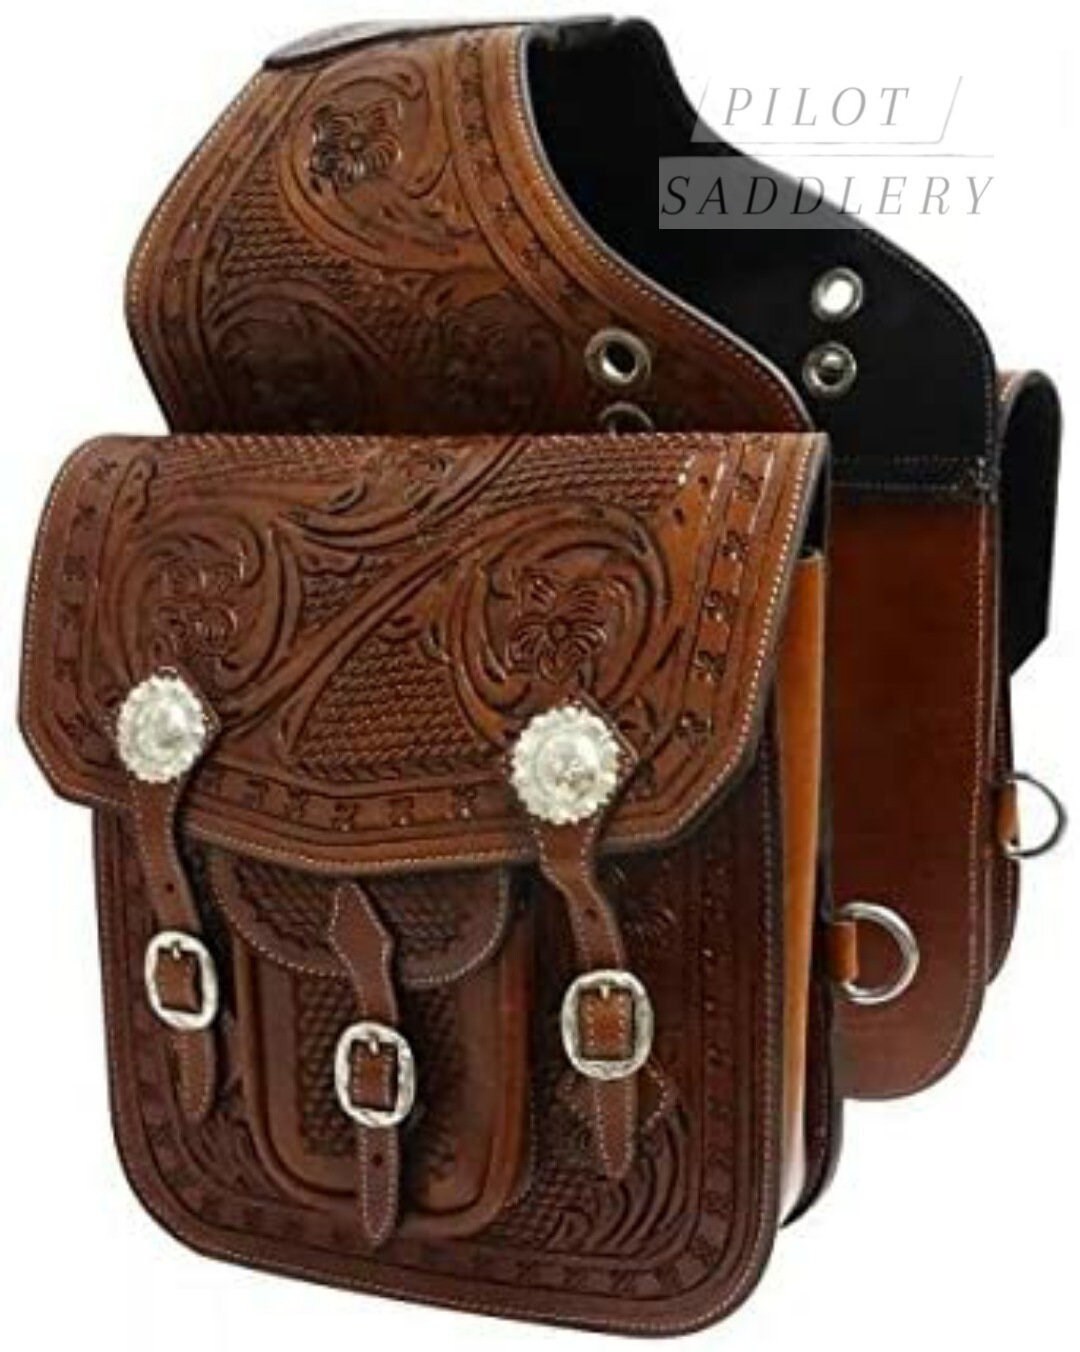 Hand Made Leather Goods - For The Home - Albums - Photo, Art & Scrapbook -  Bar C Saddlery